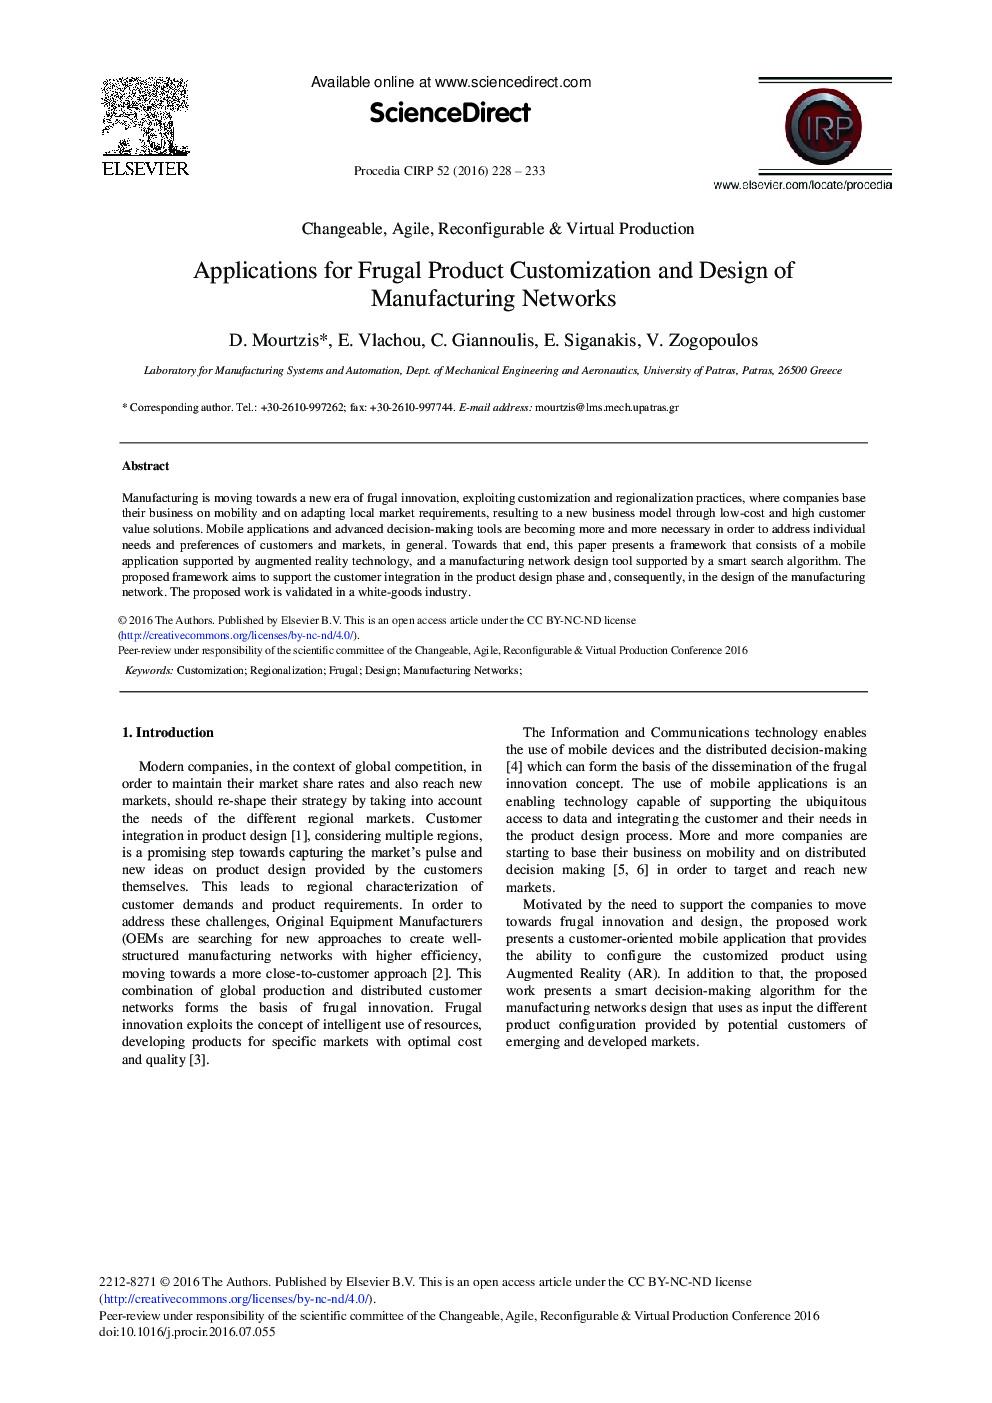 Applications for Frugal Product Customization and Design of Manufacturing Networks 